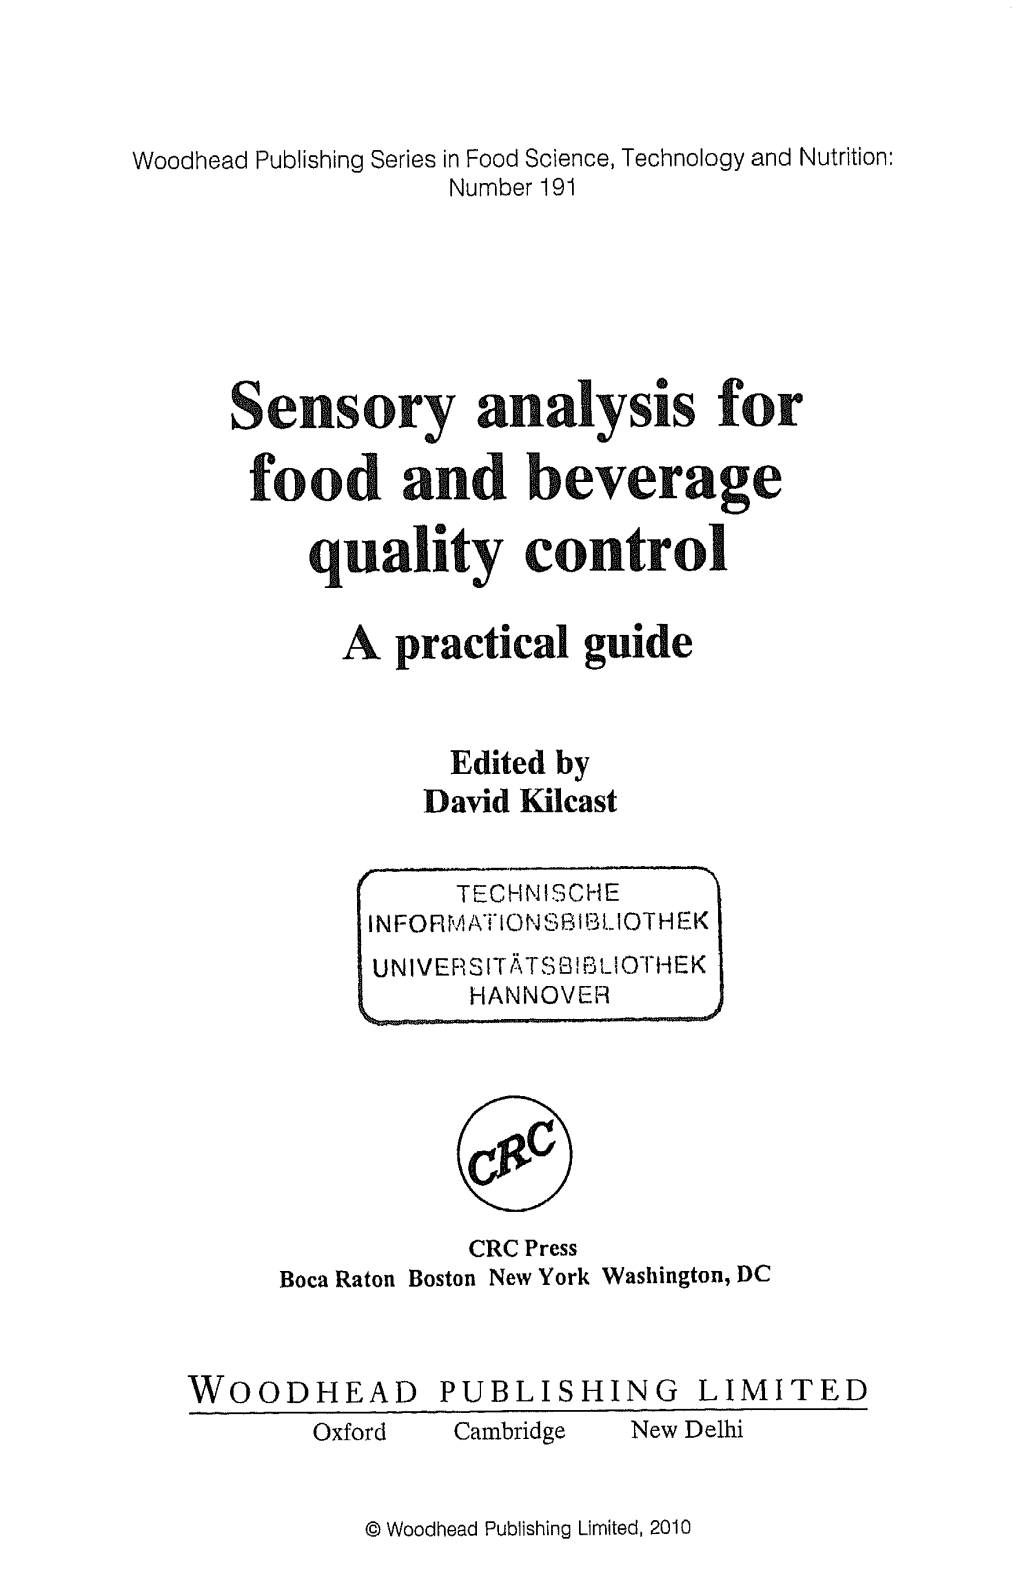 Sensory Analysis for Food and Beverage Quality Control a Practical Guide